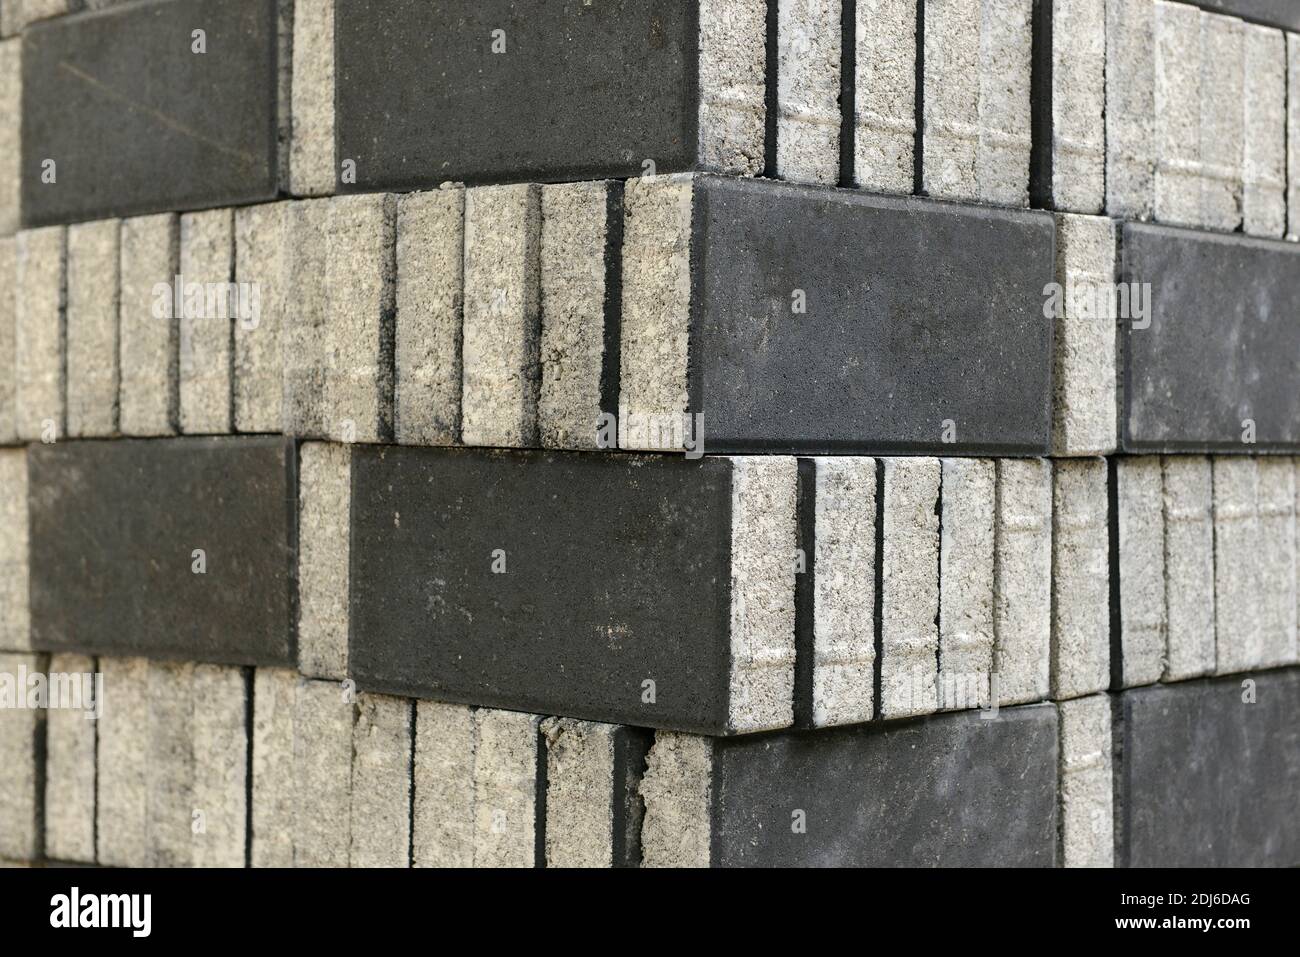 A pile of paving bricks awaits laying on a street in eastern Beijing, China Stock Photo